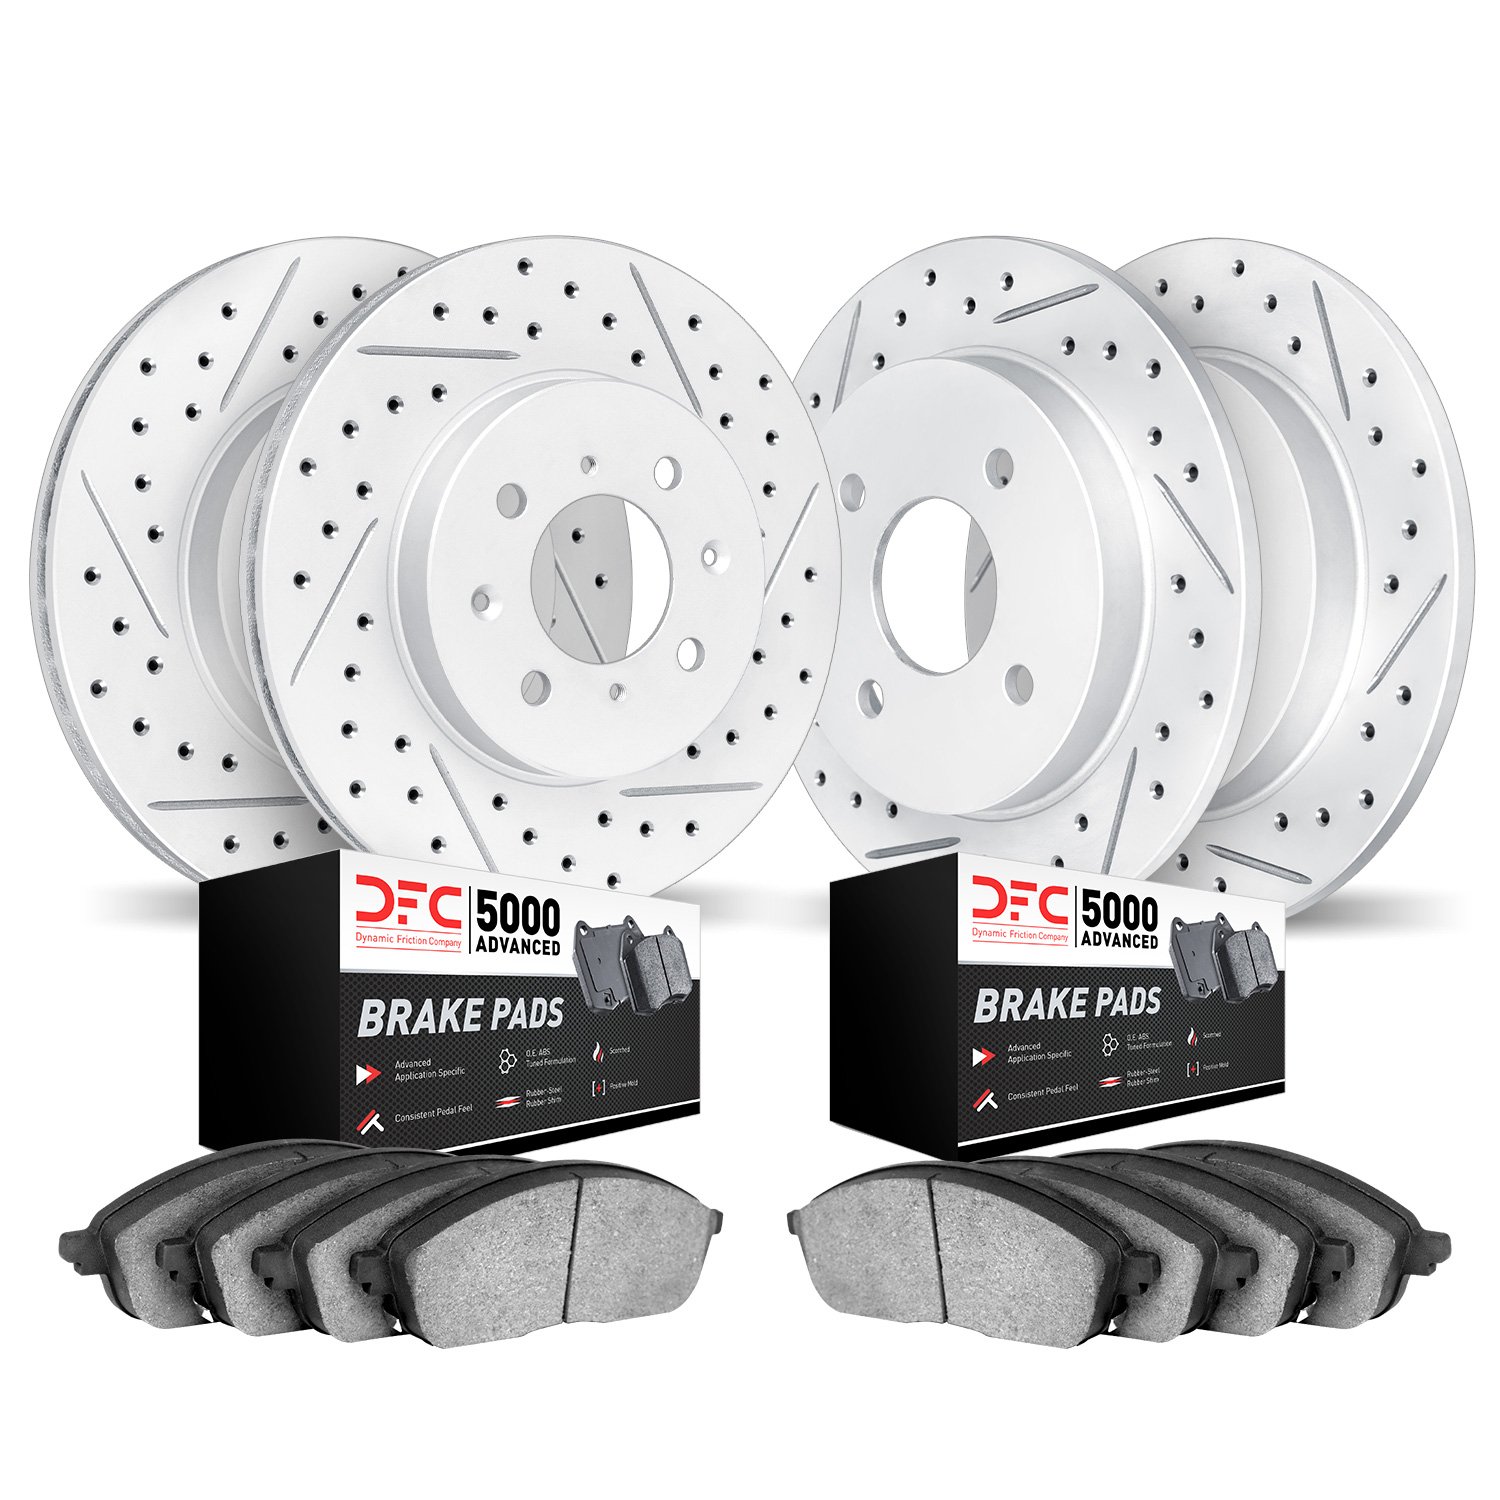 2504-07001 Geoperformance Drilled/Slotted Rotors w/5000 Advanced Brake Pads Kit, 2013-2019 Mopar, Position: Front and Rear